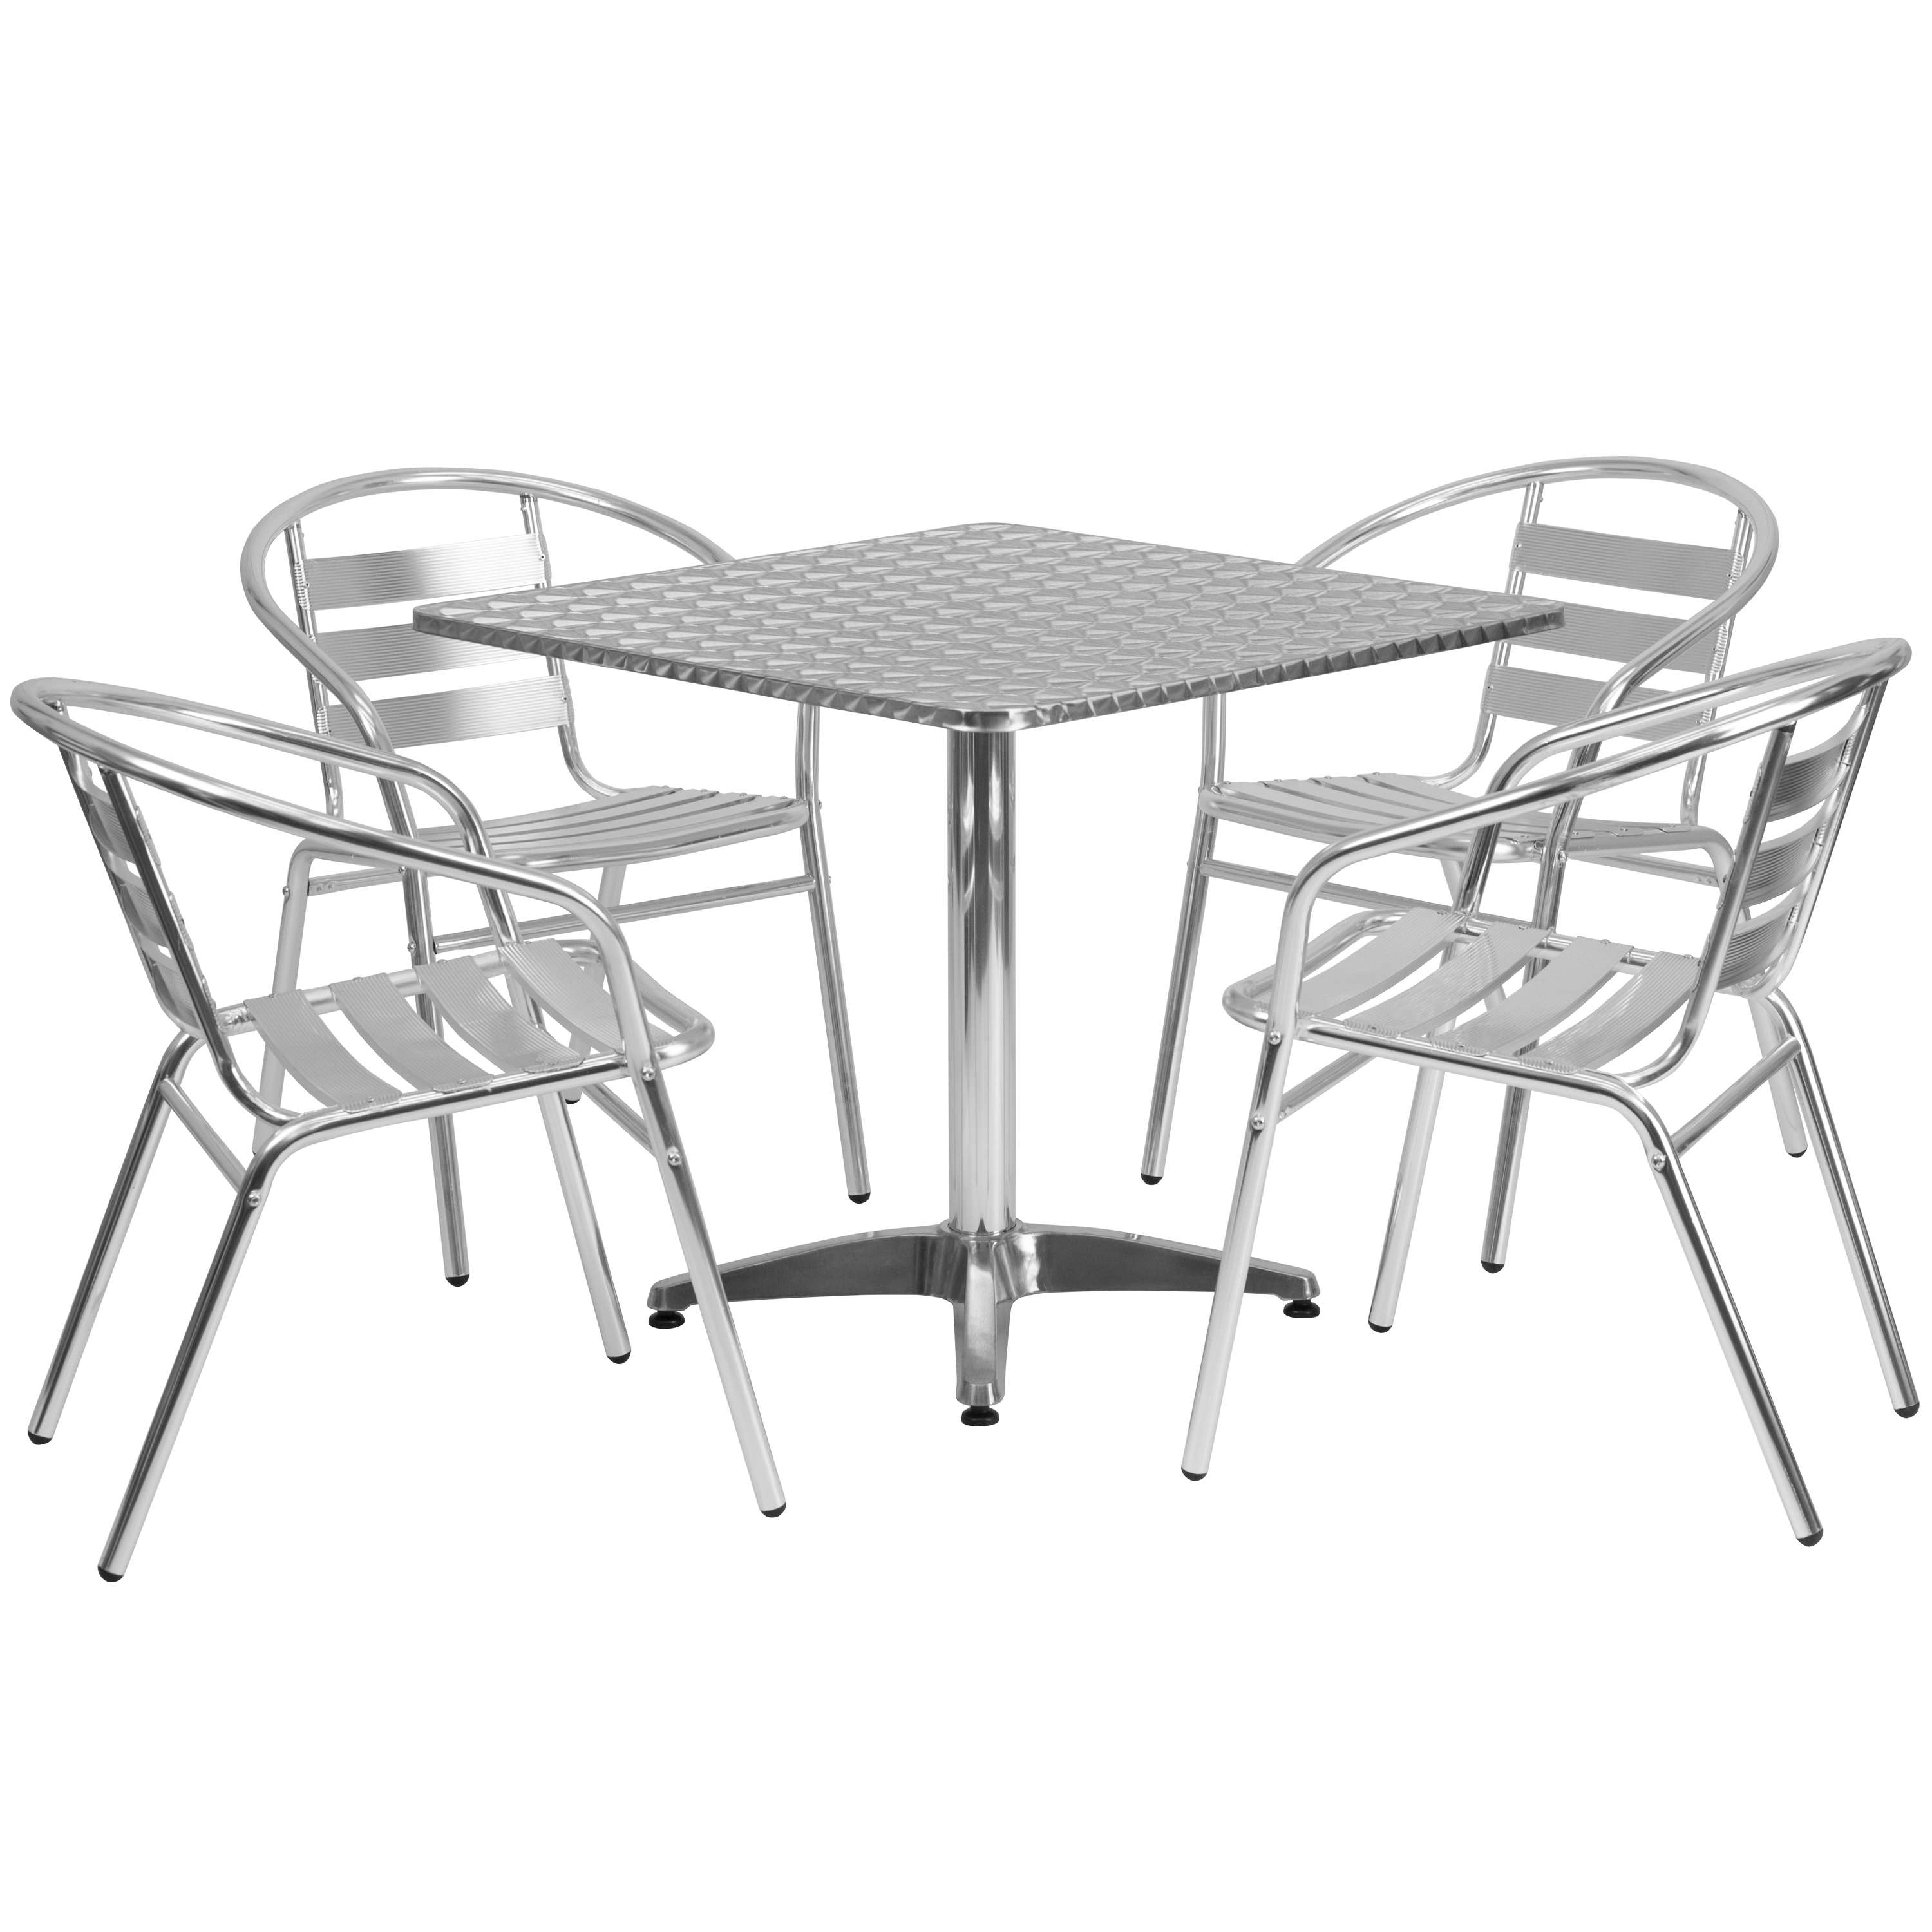 Flash Furniture 31.5'' Square Aluminum Indoor-Outdoor Table Set with 4 Slat Back Chairs - image 2 of 9